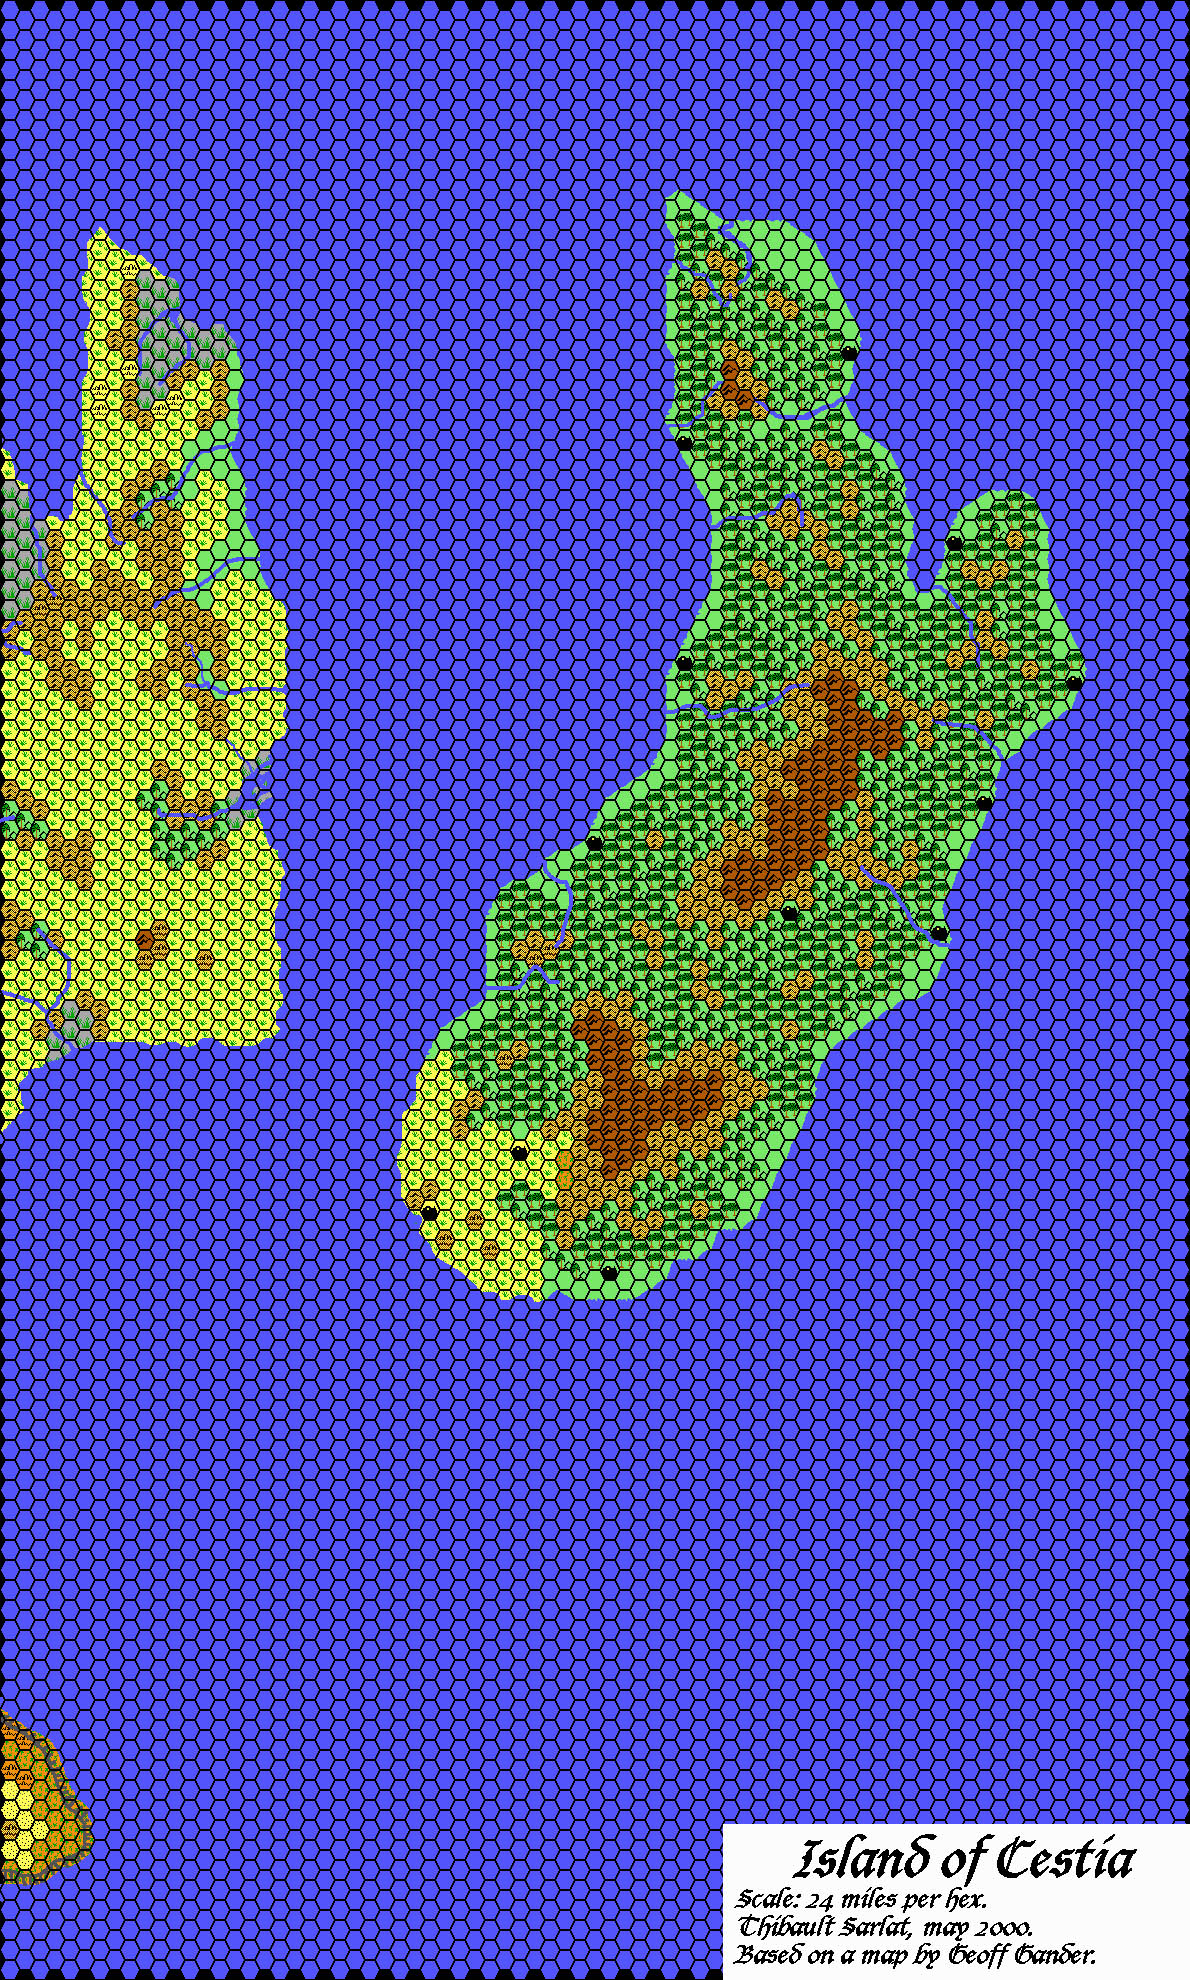 The Island of Cestia, 24 miles per hex by Thibault Sarlat, August 2000